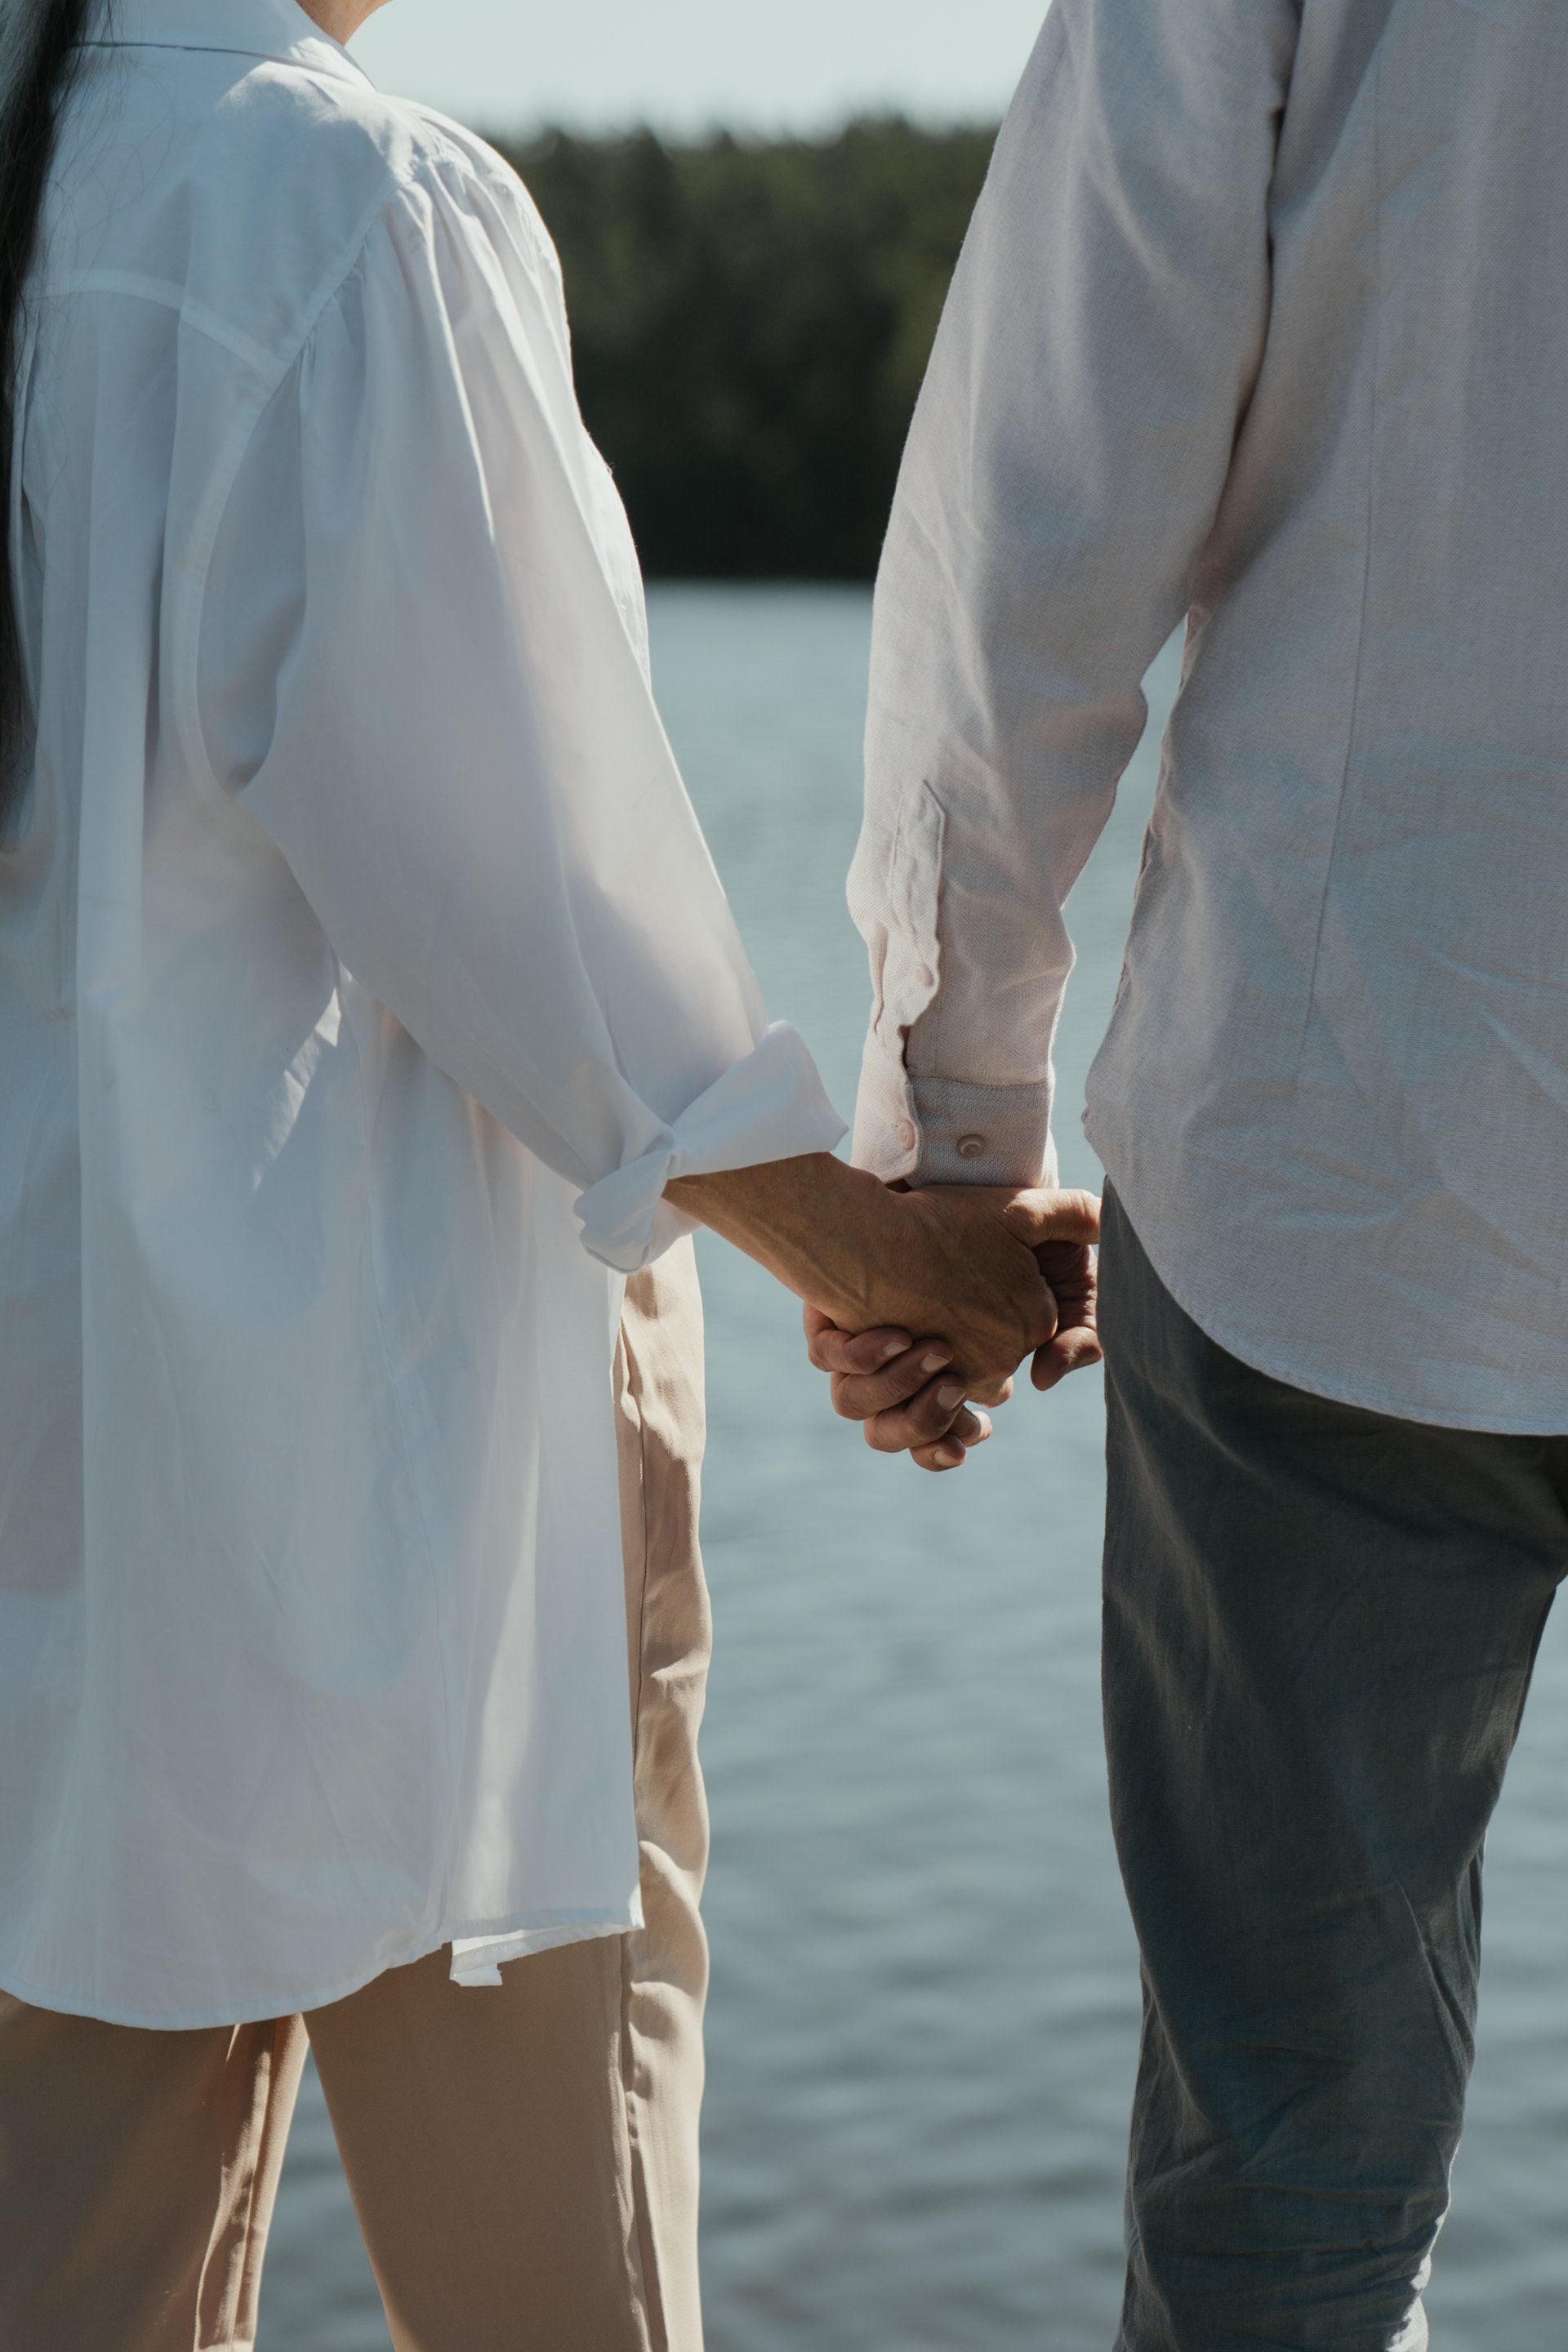 A man and a woman are holding hands while standing next to a body of water.